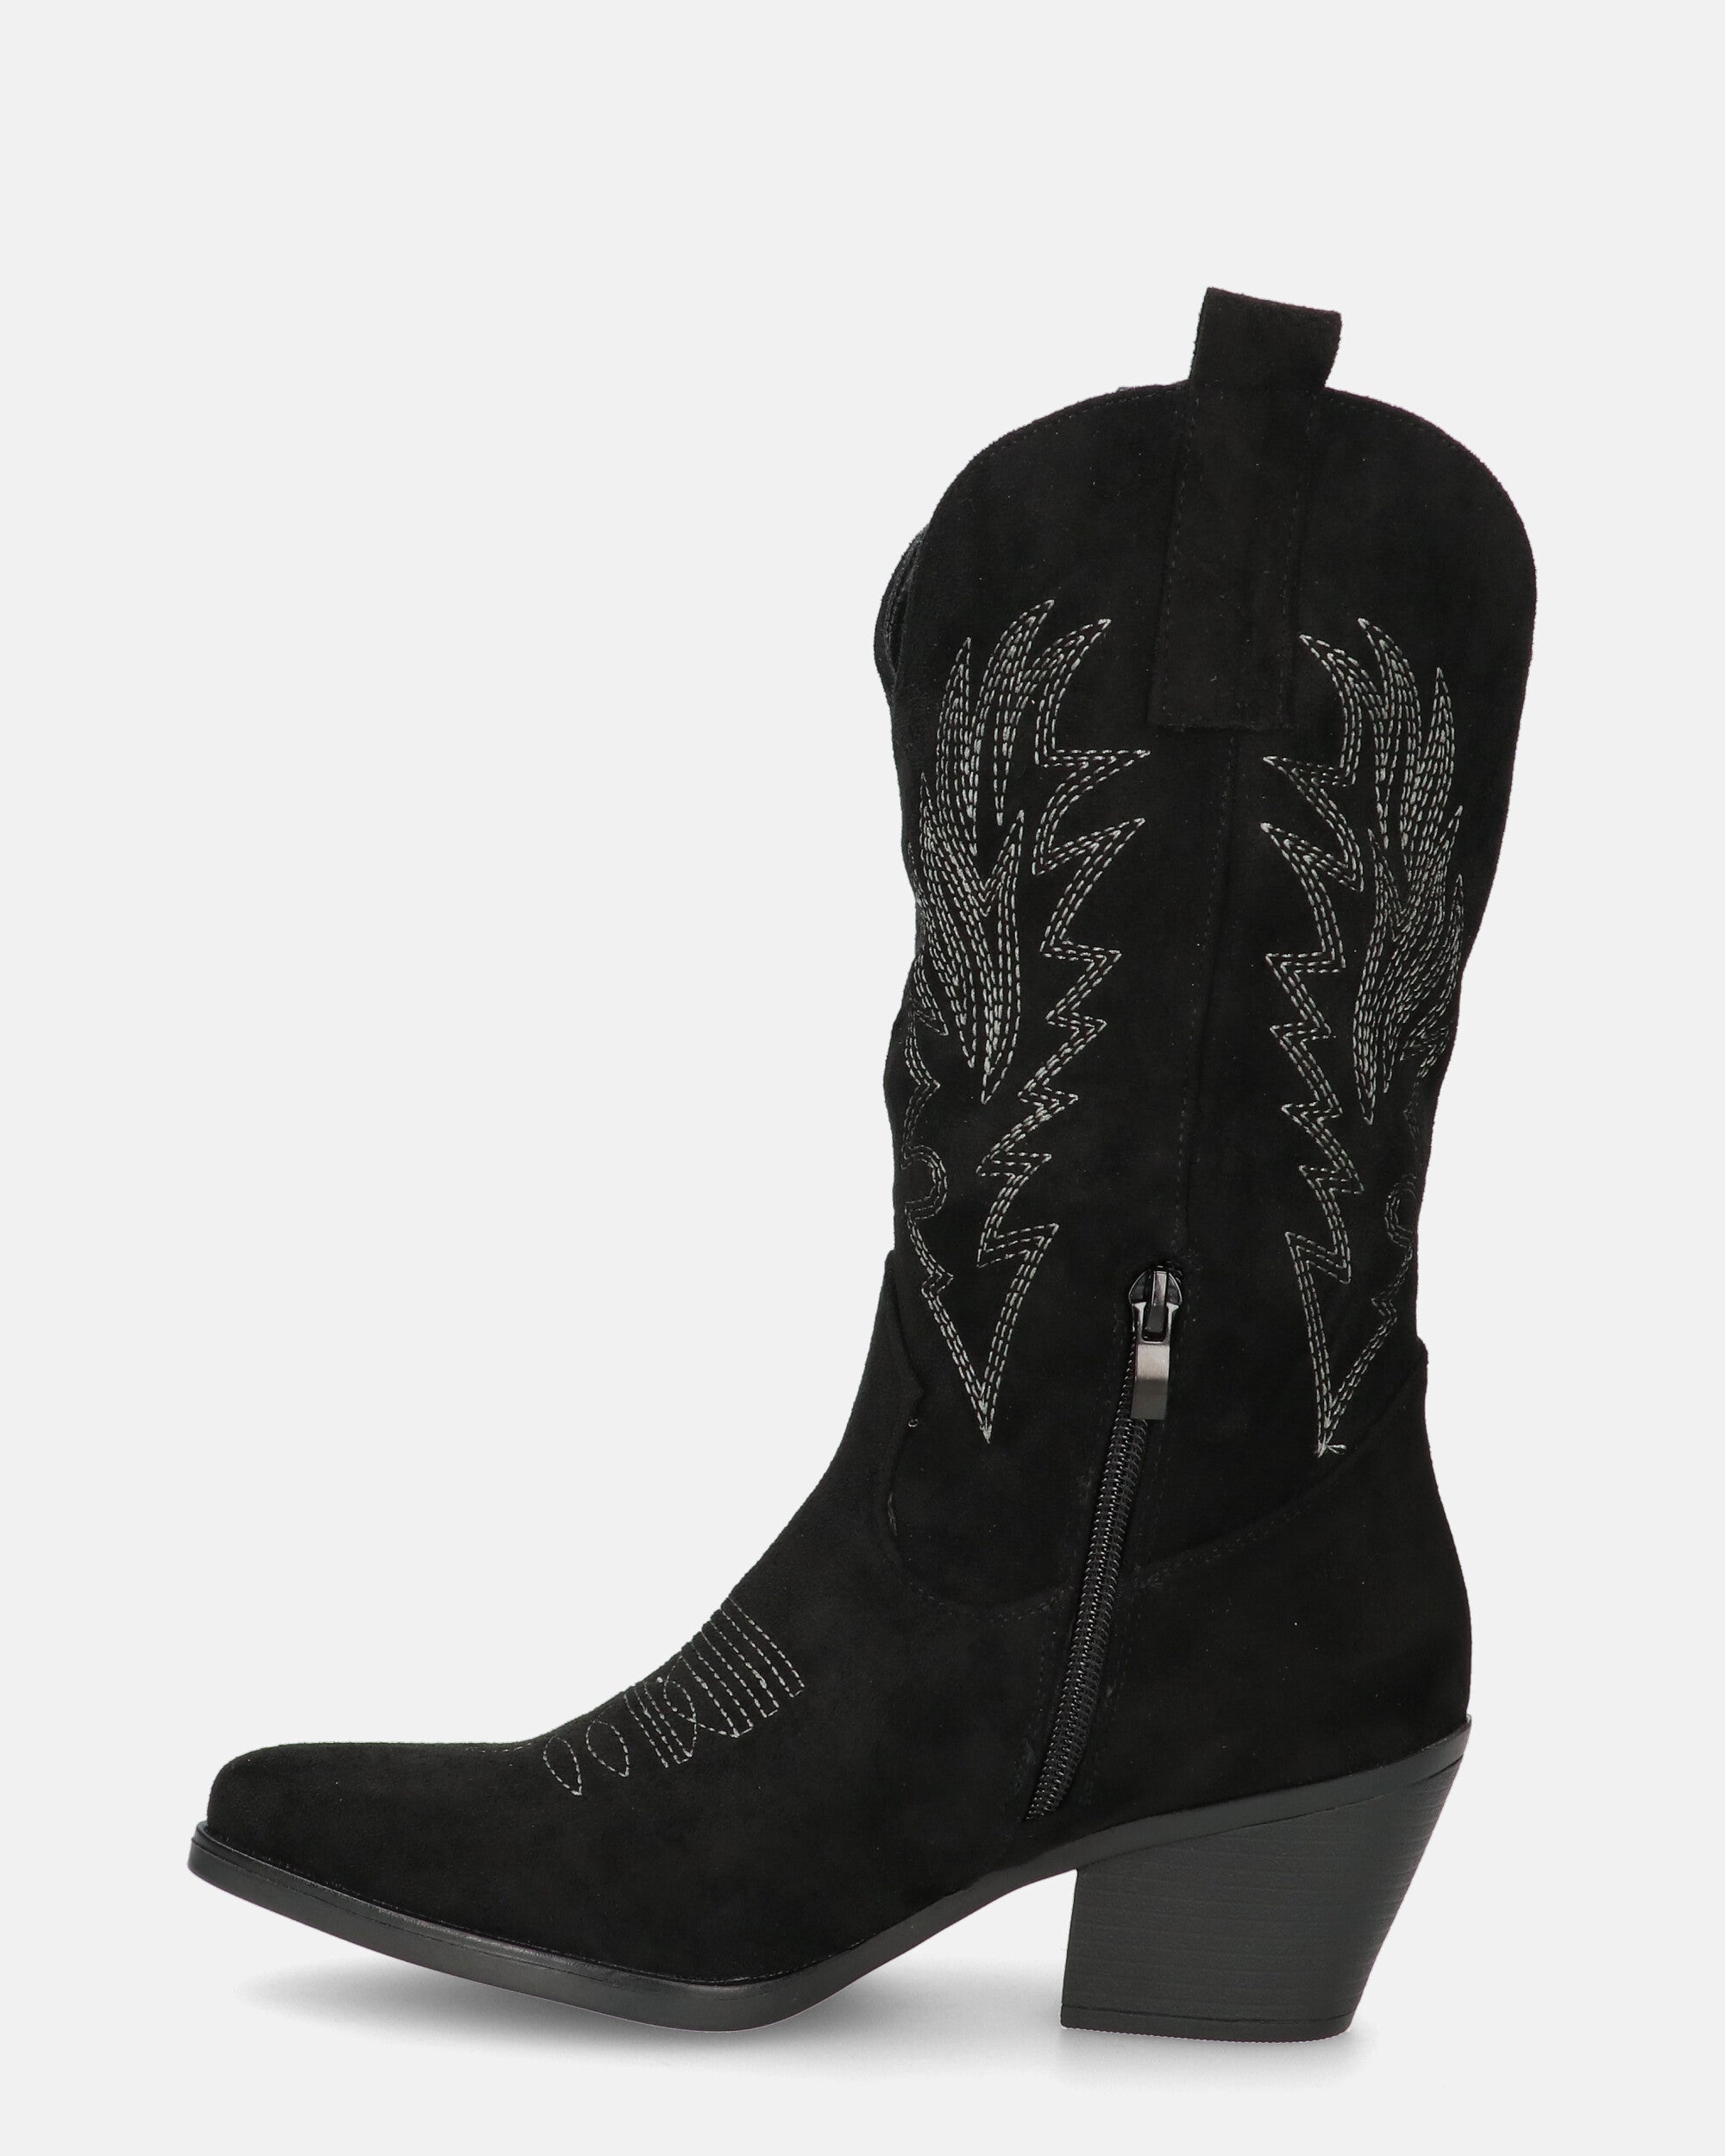 SENIA - black suede camperos ankle boots with embroidery